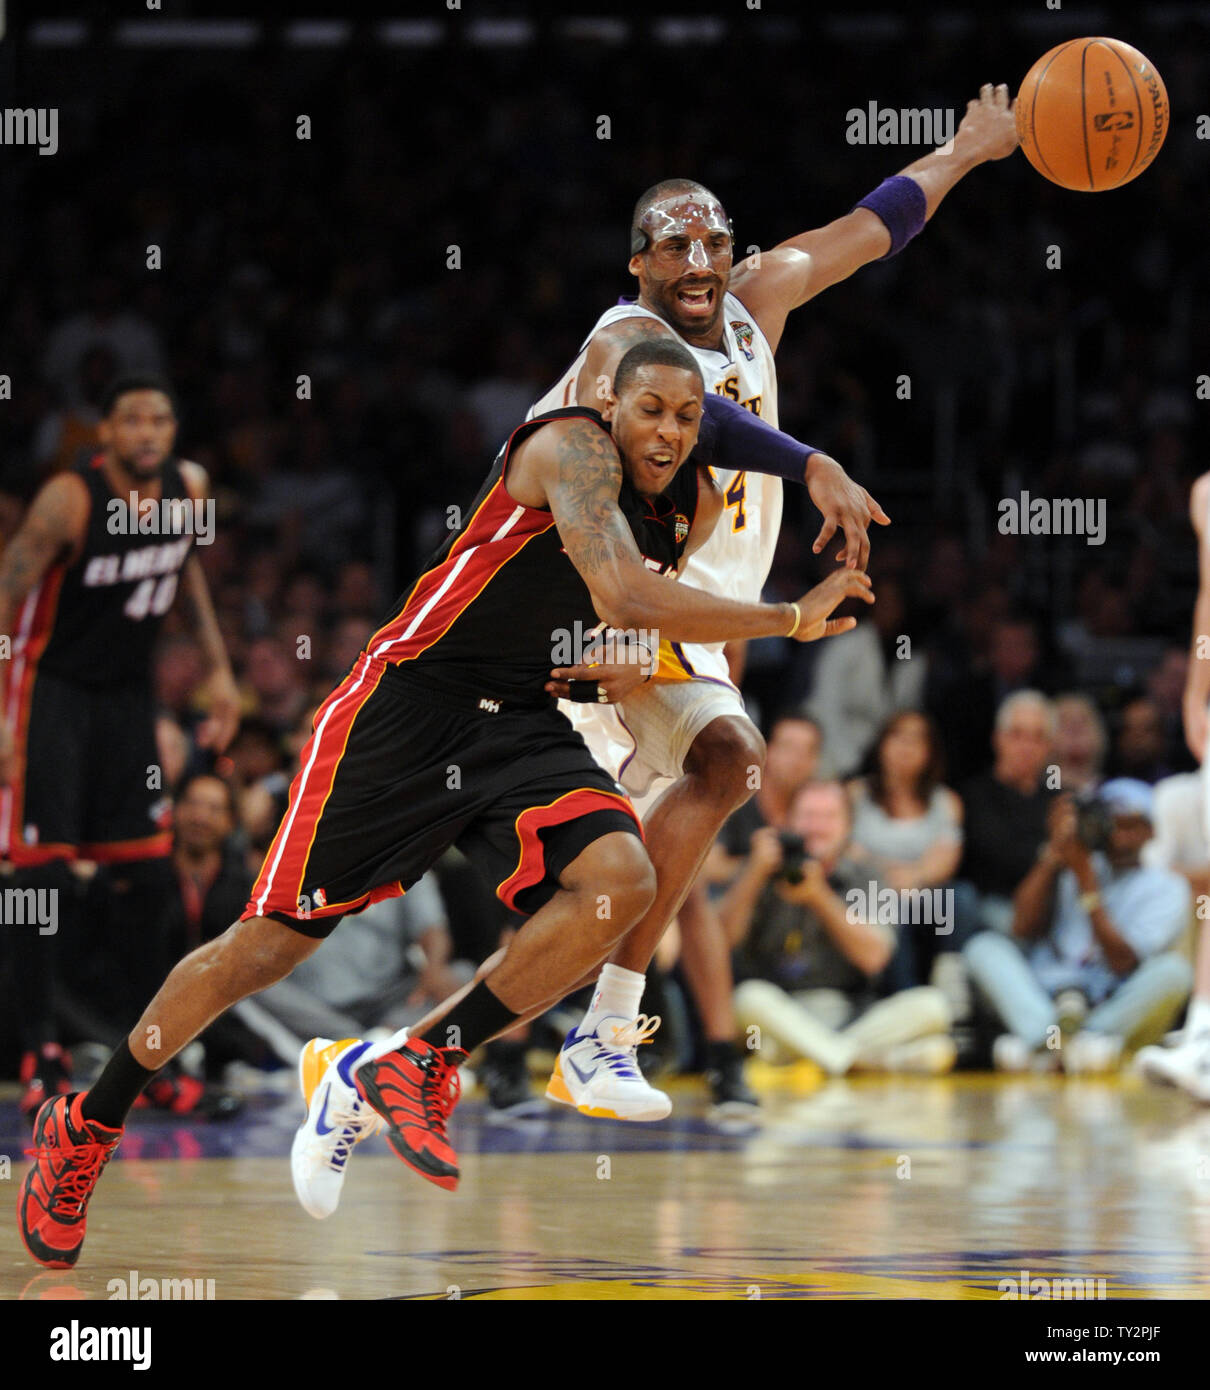 Miami Heat point guard Mario Chalmers (15) steals the ball from Los Angeles Lakers shooting guard Kobe Bryant (24) in the second half of  their NBA basketball game in Los Angeles on March 4, 2012.  The Lakers won 93 to 83.  UPI/Lori Shepler Stock Photo